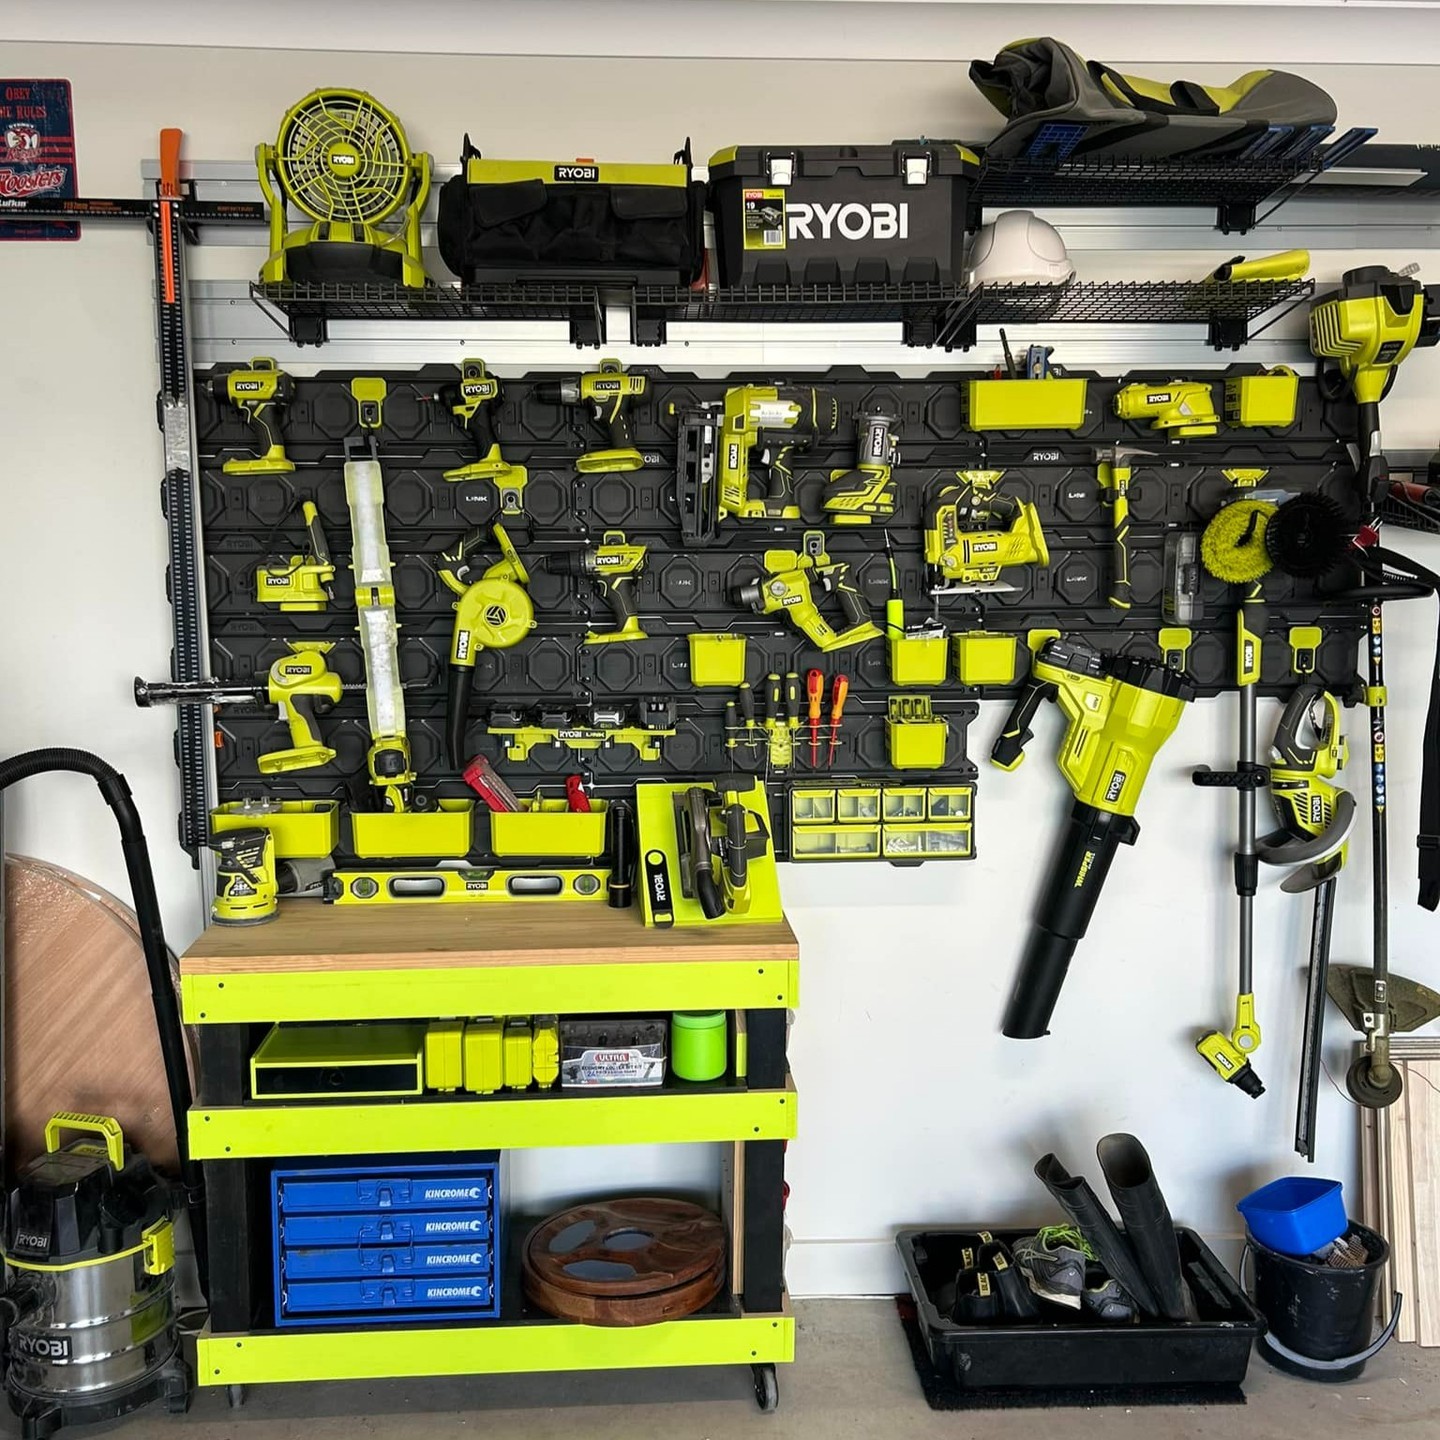 Every year, on April 26, the day is dedicated to proper planning, cleaning up, and decluttering — Get Organised Day!

Check out how some of our MyRYOBI Community members are using the Link Modular System to organise their space.

Add RYOBI LINK to your wish list today.

📸: Kym L, Barry O and Kyle N.

#RYOBIau #BatteryPowered #PowerTools #Organisation #LinkSystem